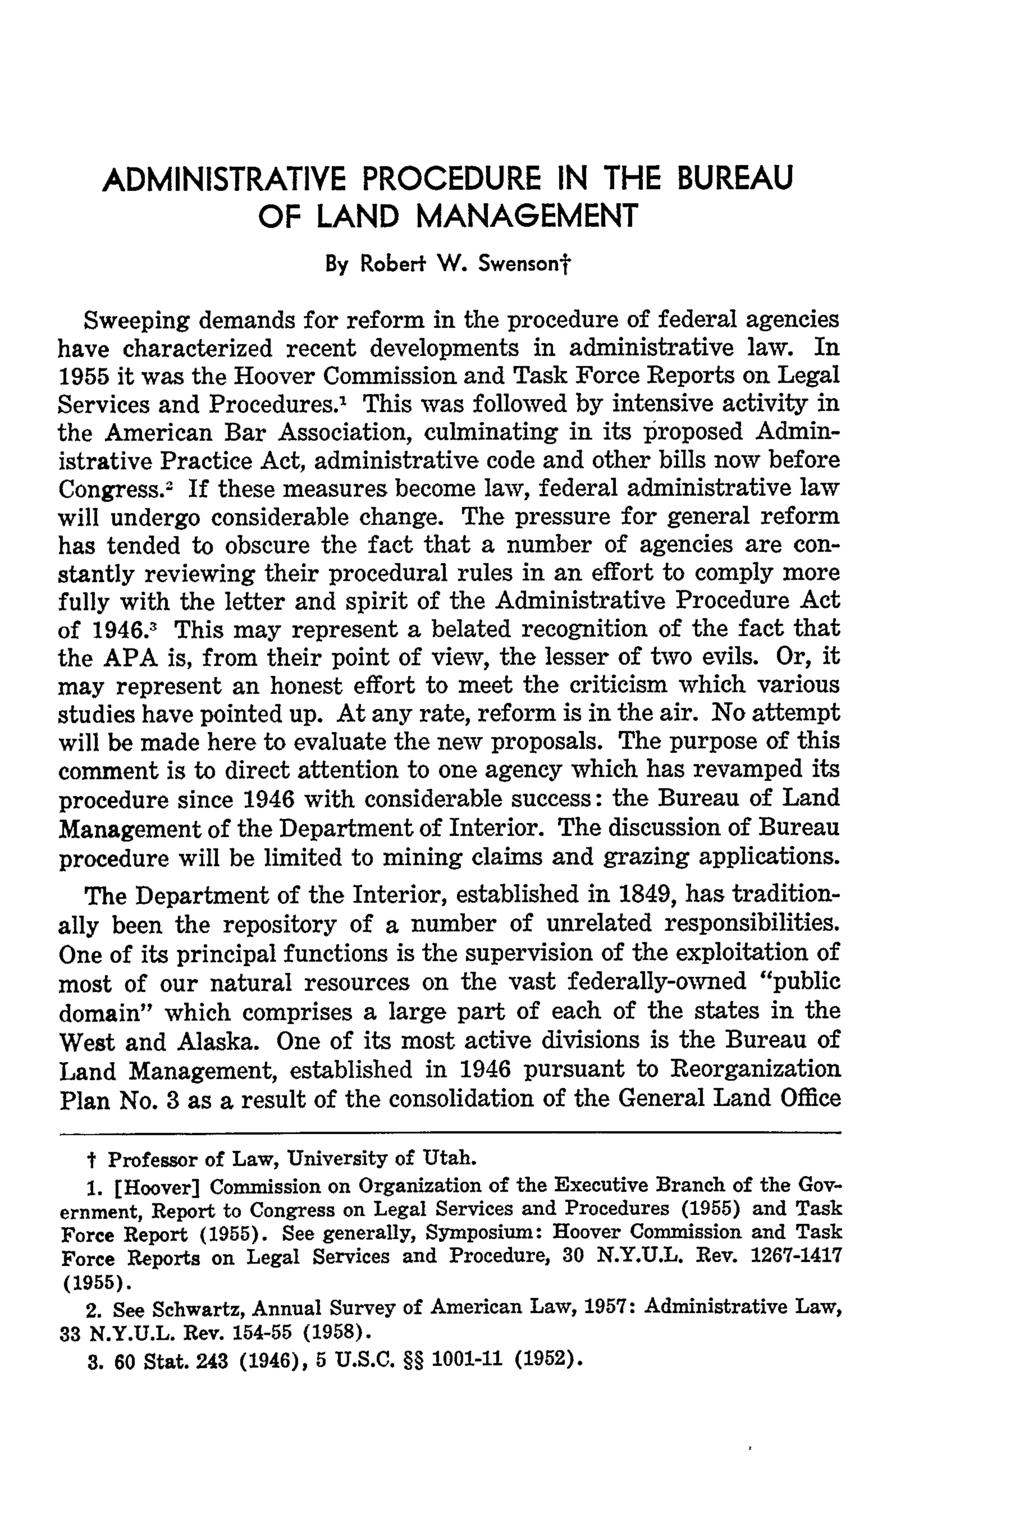 ADMINISTRATIVE PROCEDURE IN THE BUREAU OF LAND MANAGEMENT By Robert W.